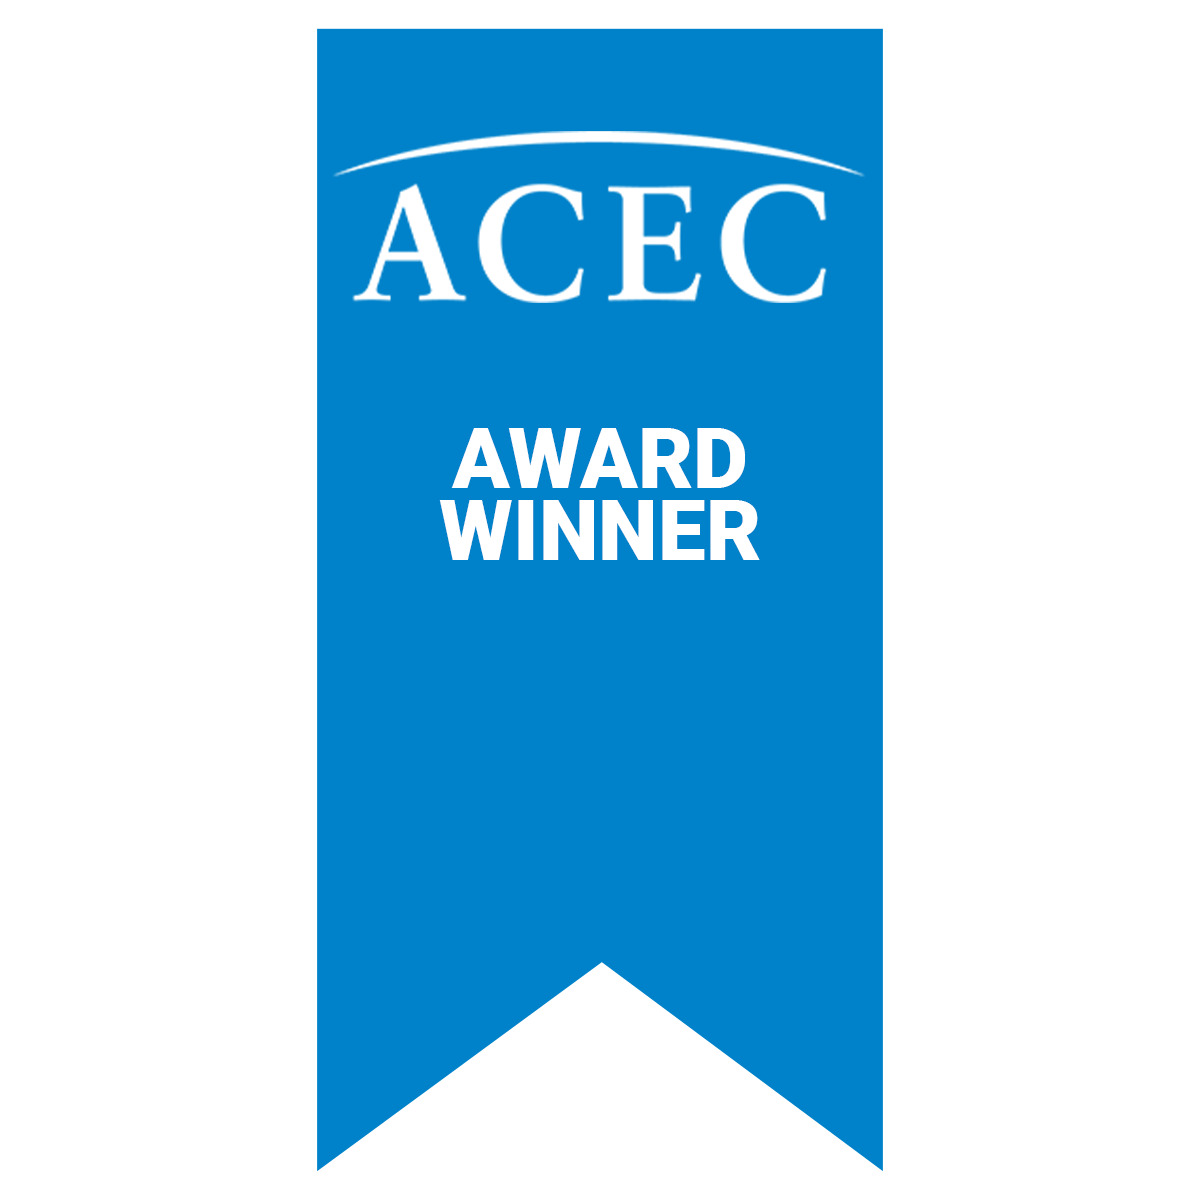 Building/Technology Systems Gold Award from ACEC New York